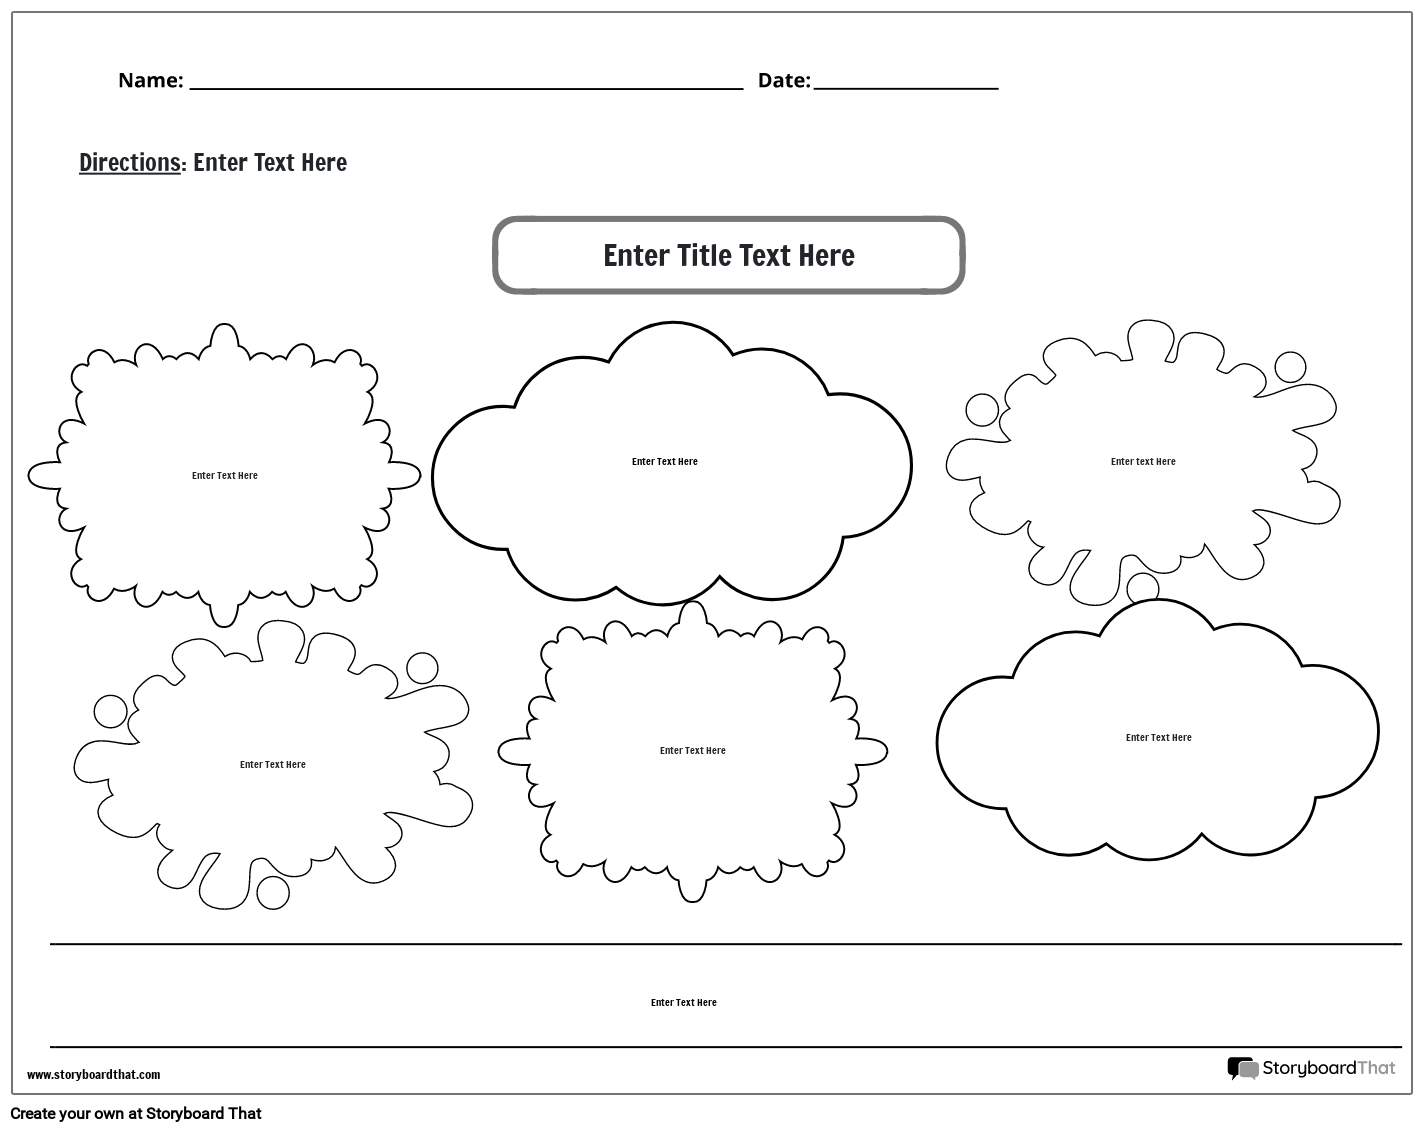 Poetry Worksheet Guide with Simple Cloudy Shapes